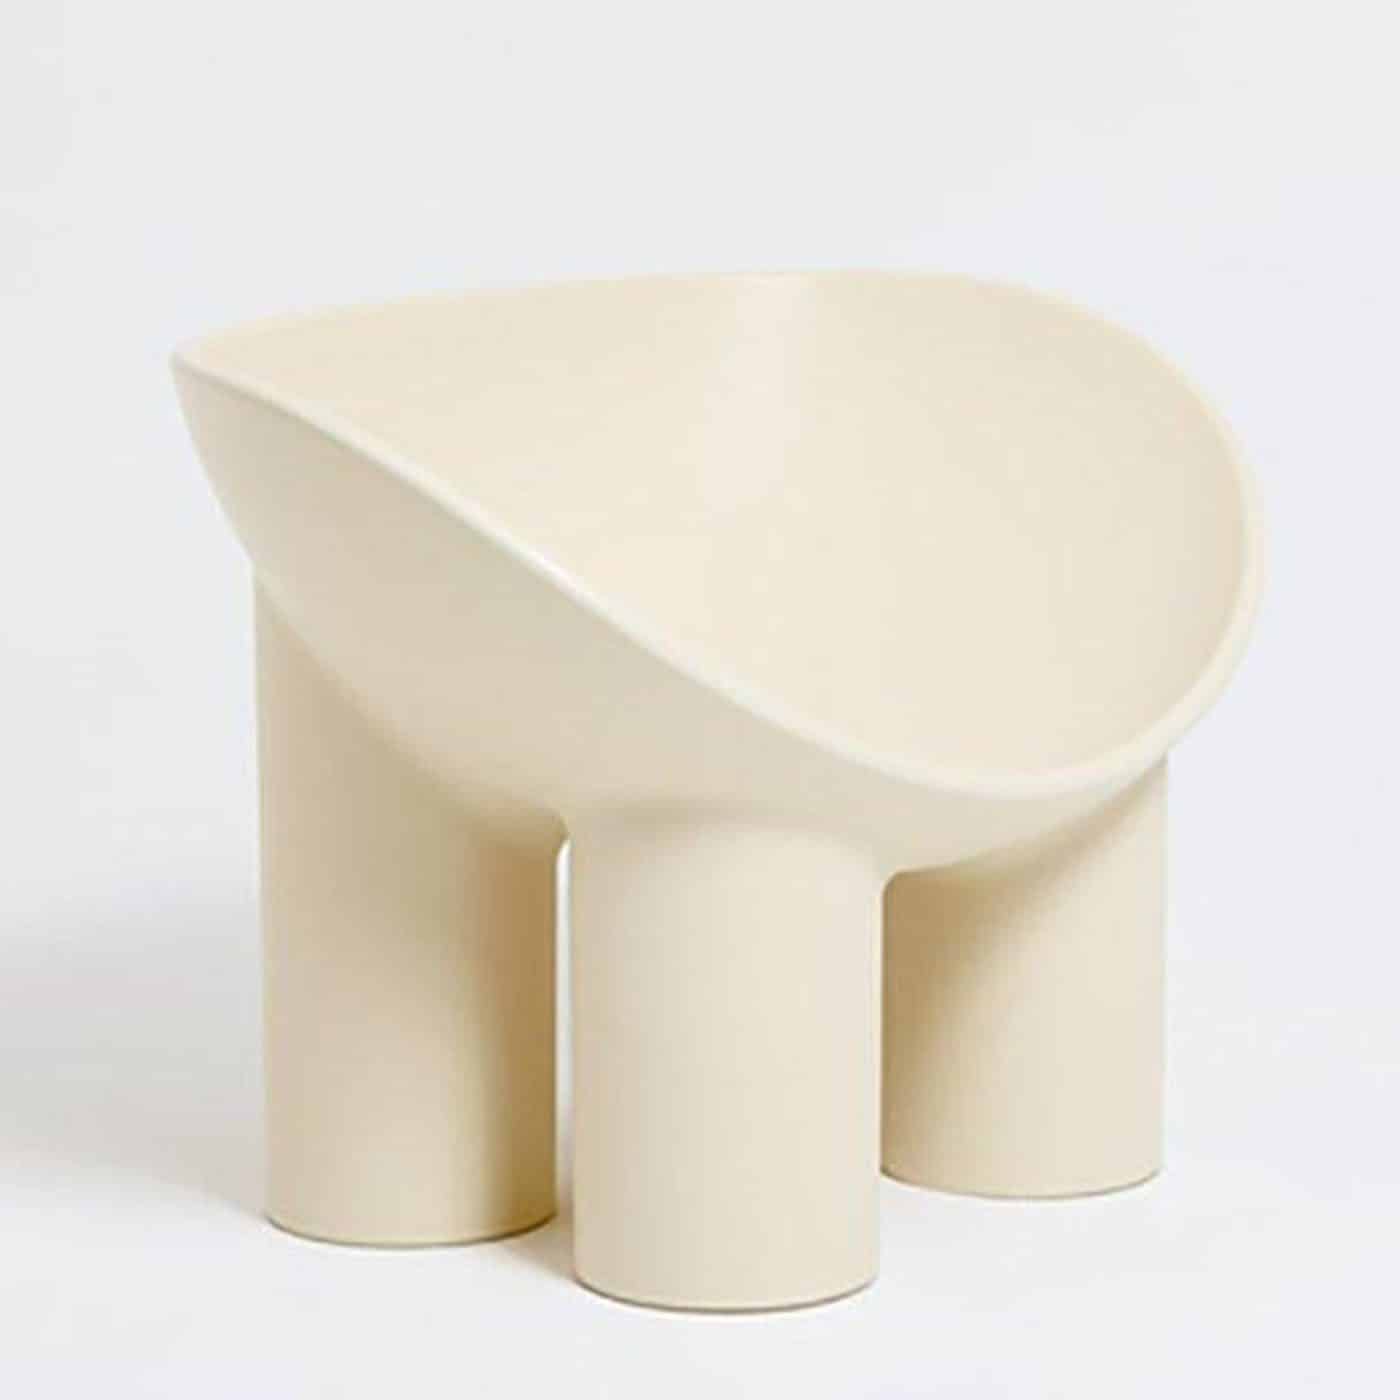 Faye Toogood’s ROLY-POLY chair